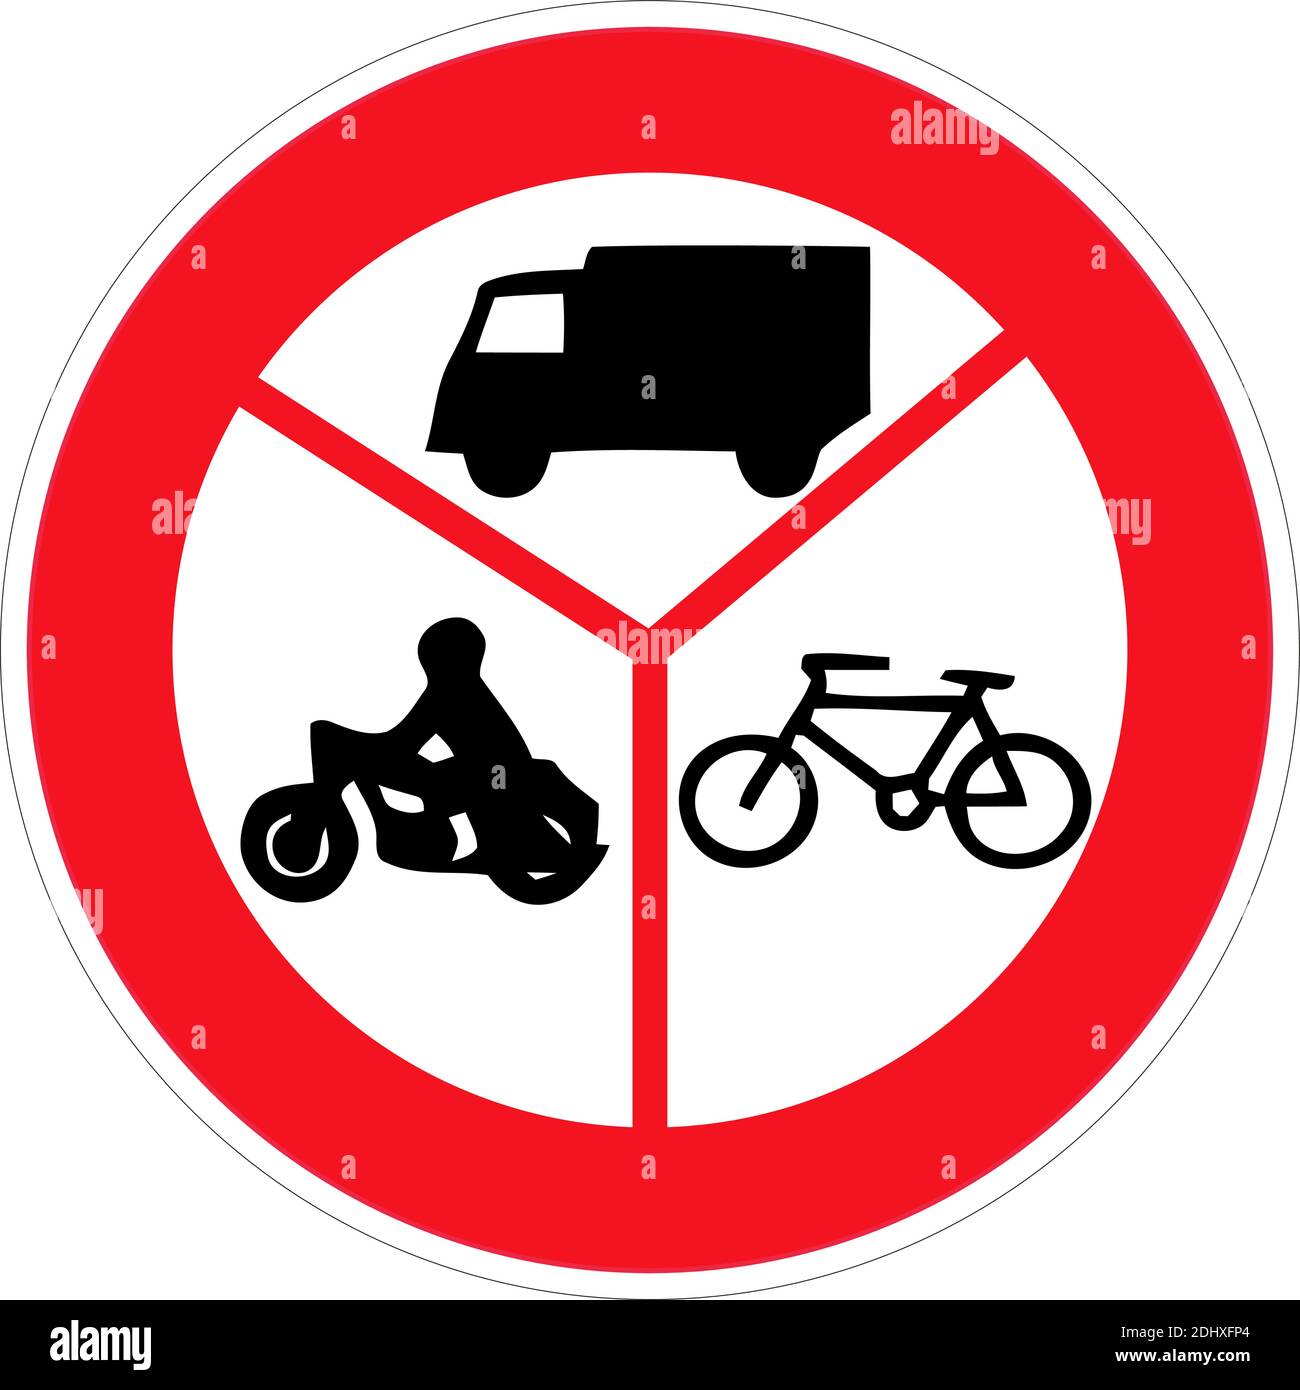 Road sign no entry of marked vehicles. Vector illustration. Stock Vector